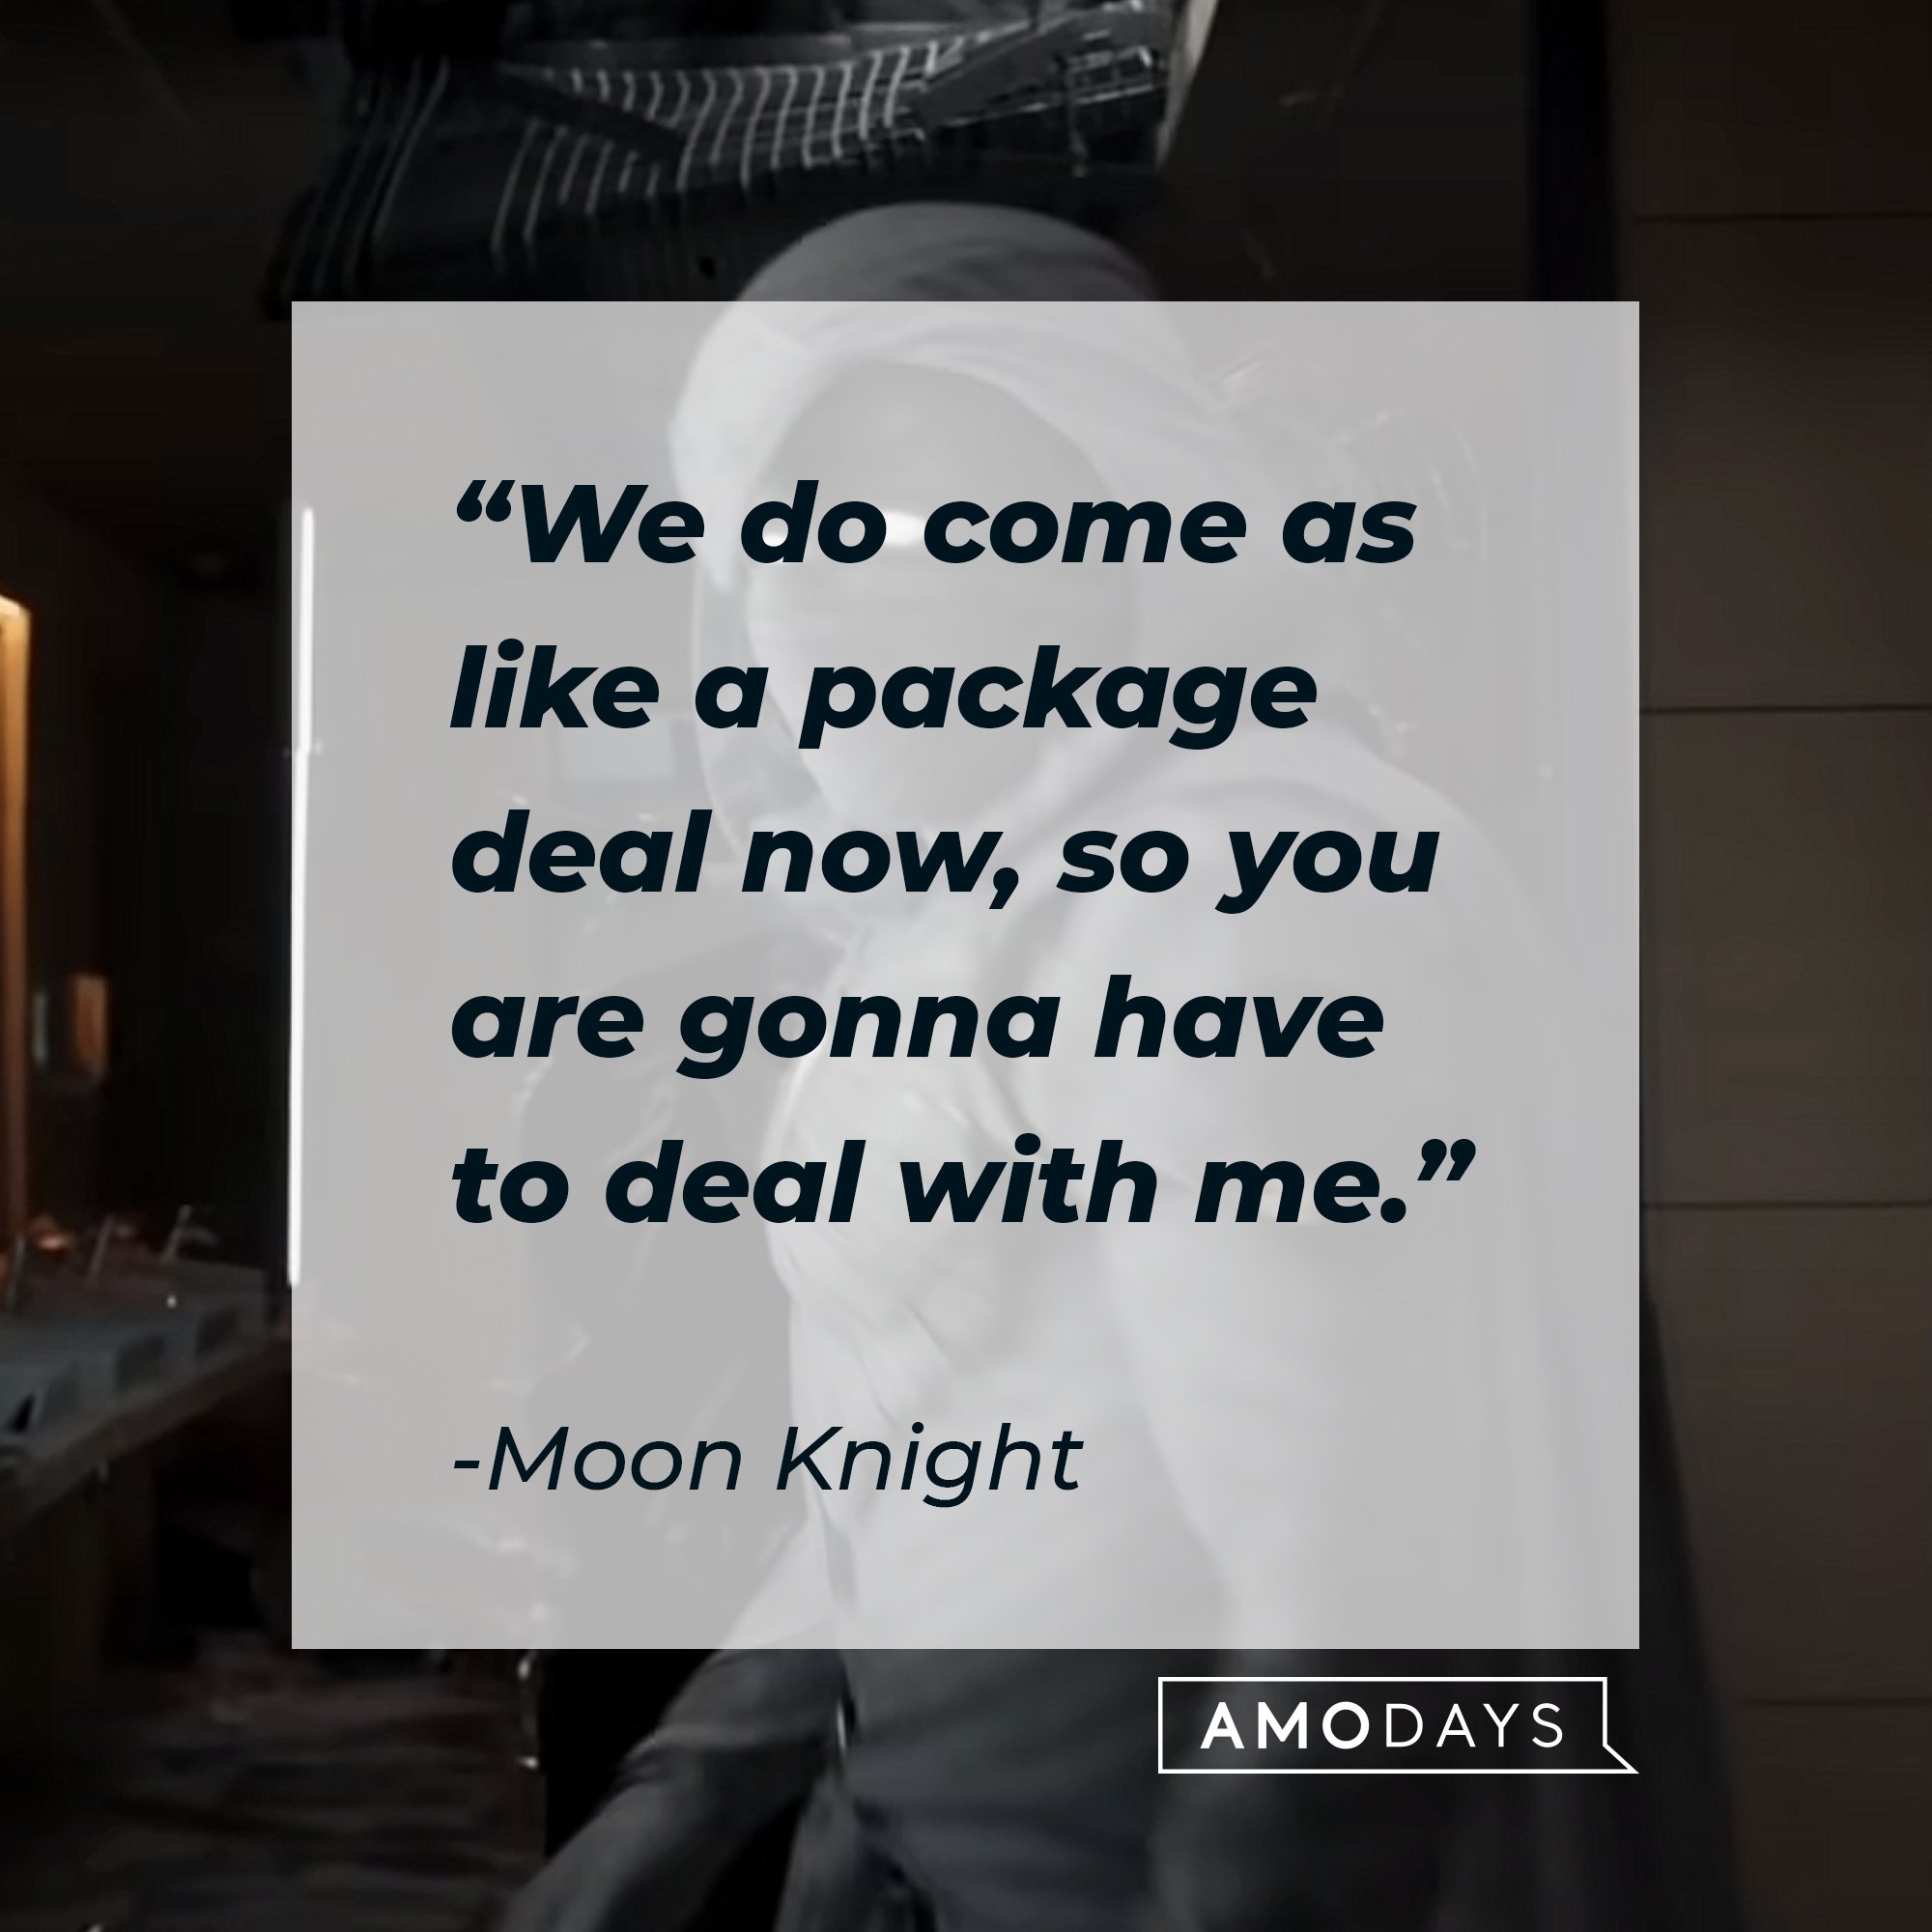 Moon Knight’s quote: "We do come as like a package deal now, so you are gonna have to deal with me." | Image: AmoDays